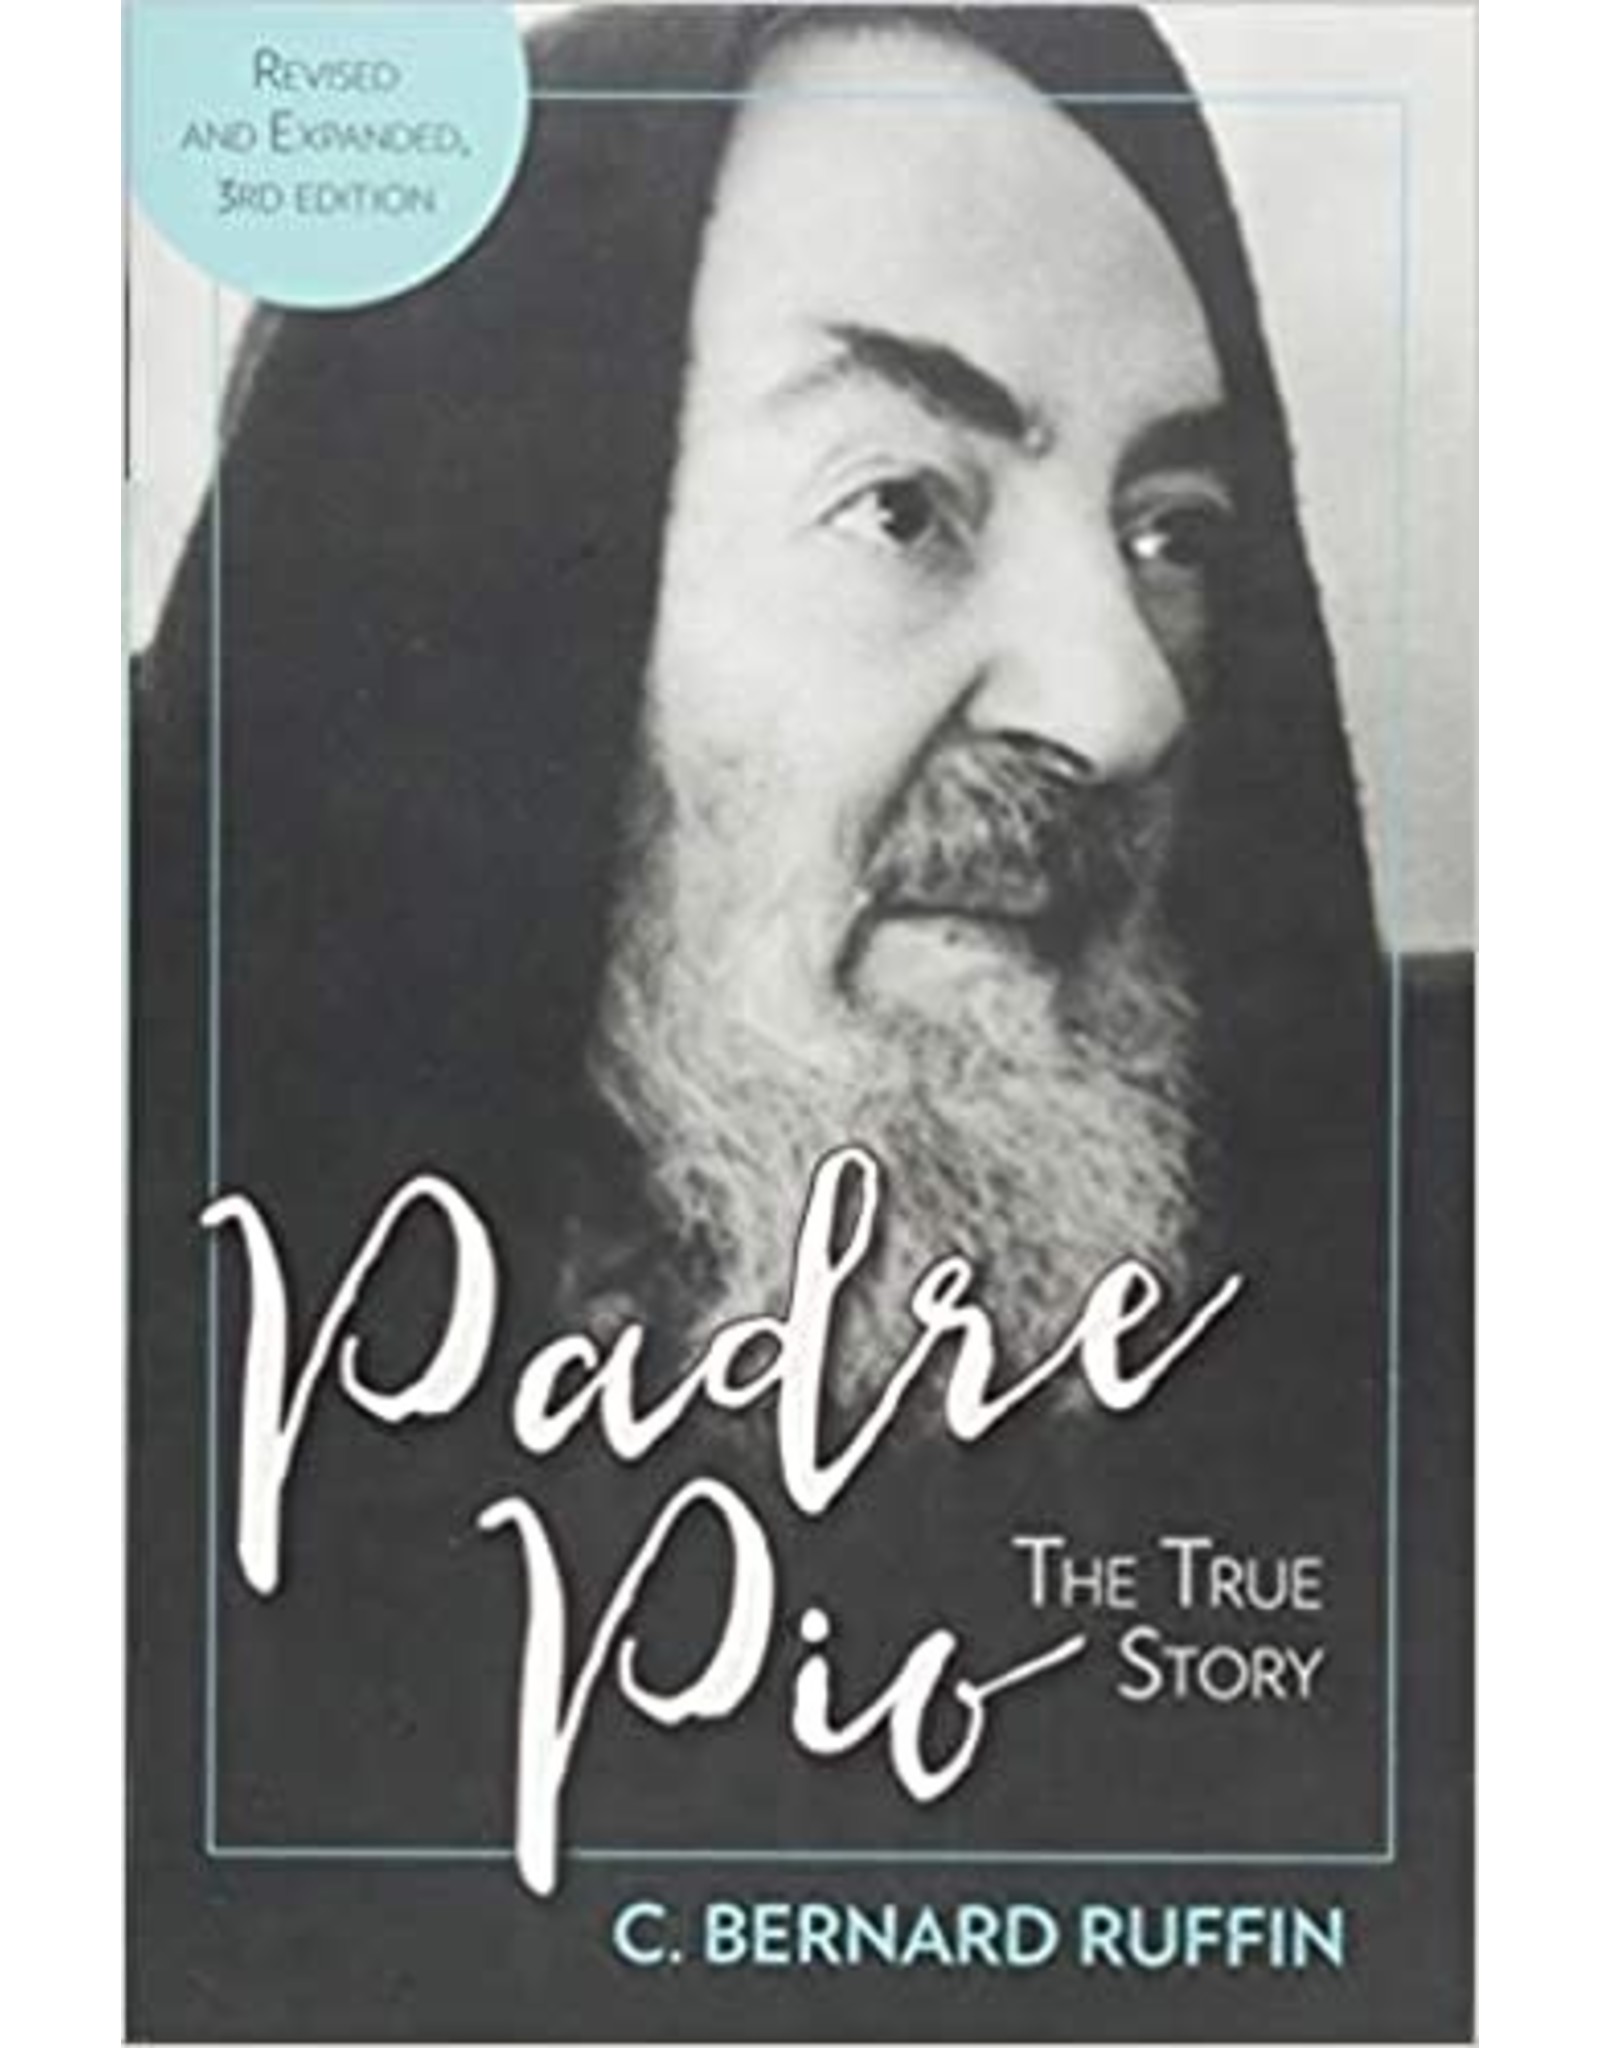 OSV (Our Sunday Visitor) Padre Pio: The True Story